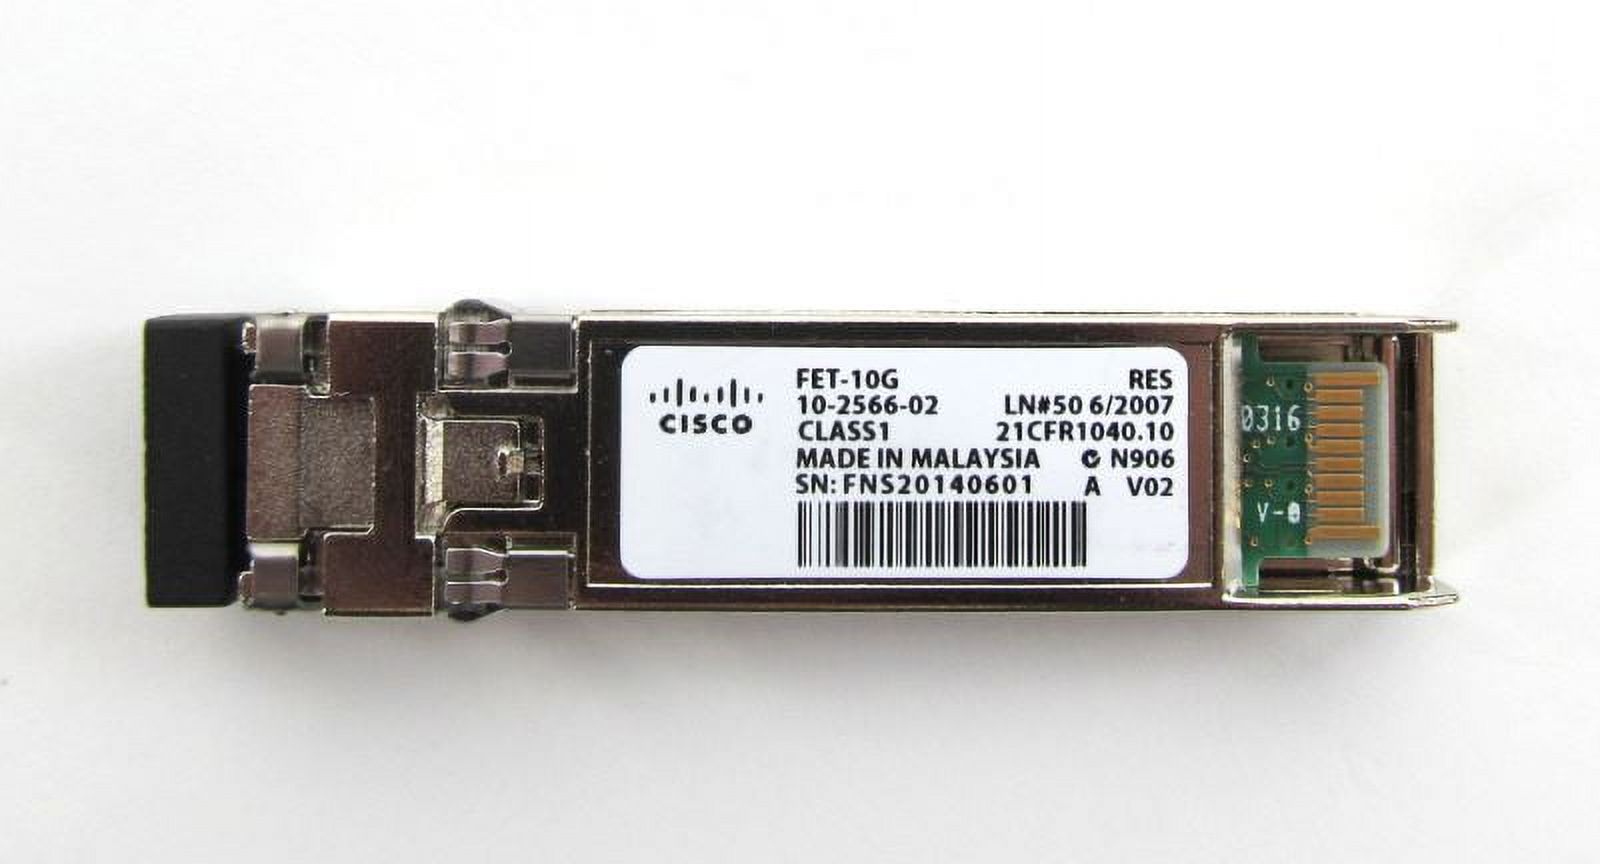 Used - Cisco FET-10G SFP LC/PC Multi-Mode Fabric Extender Transceiver - image 3 of 3